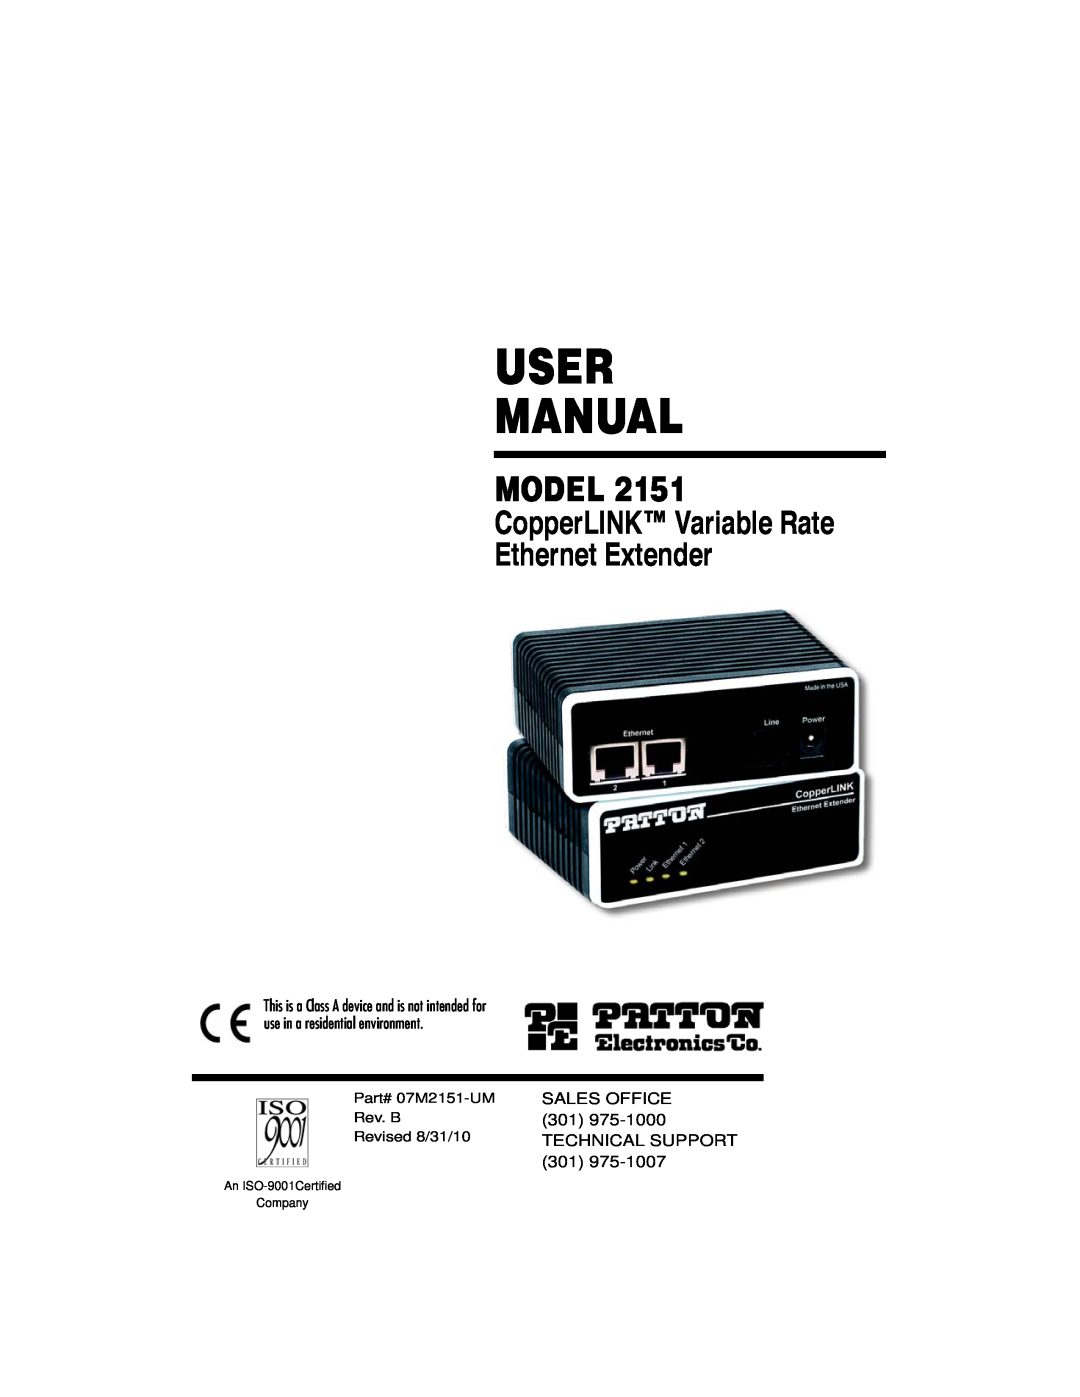 Patton electronic 2151 user manual User Manual, Model, CopperLINK Variable Rate Ethernet Extender 